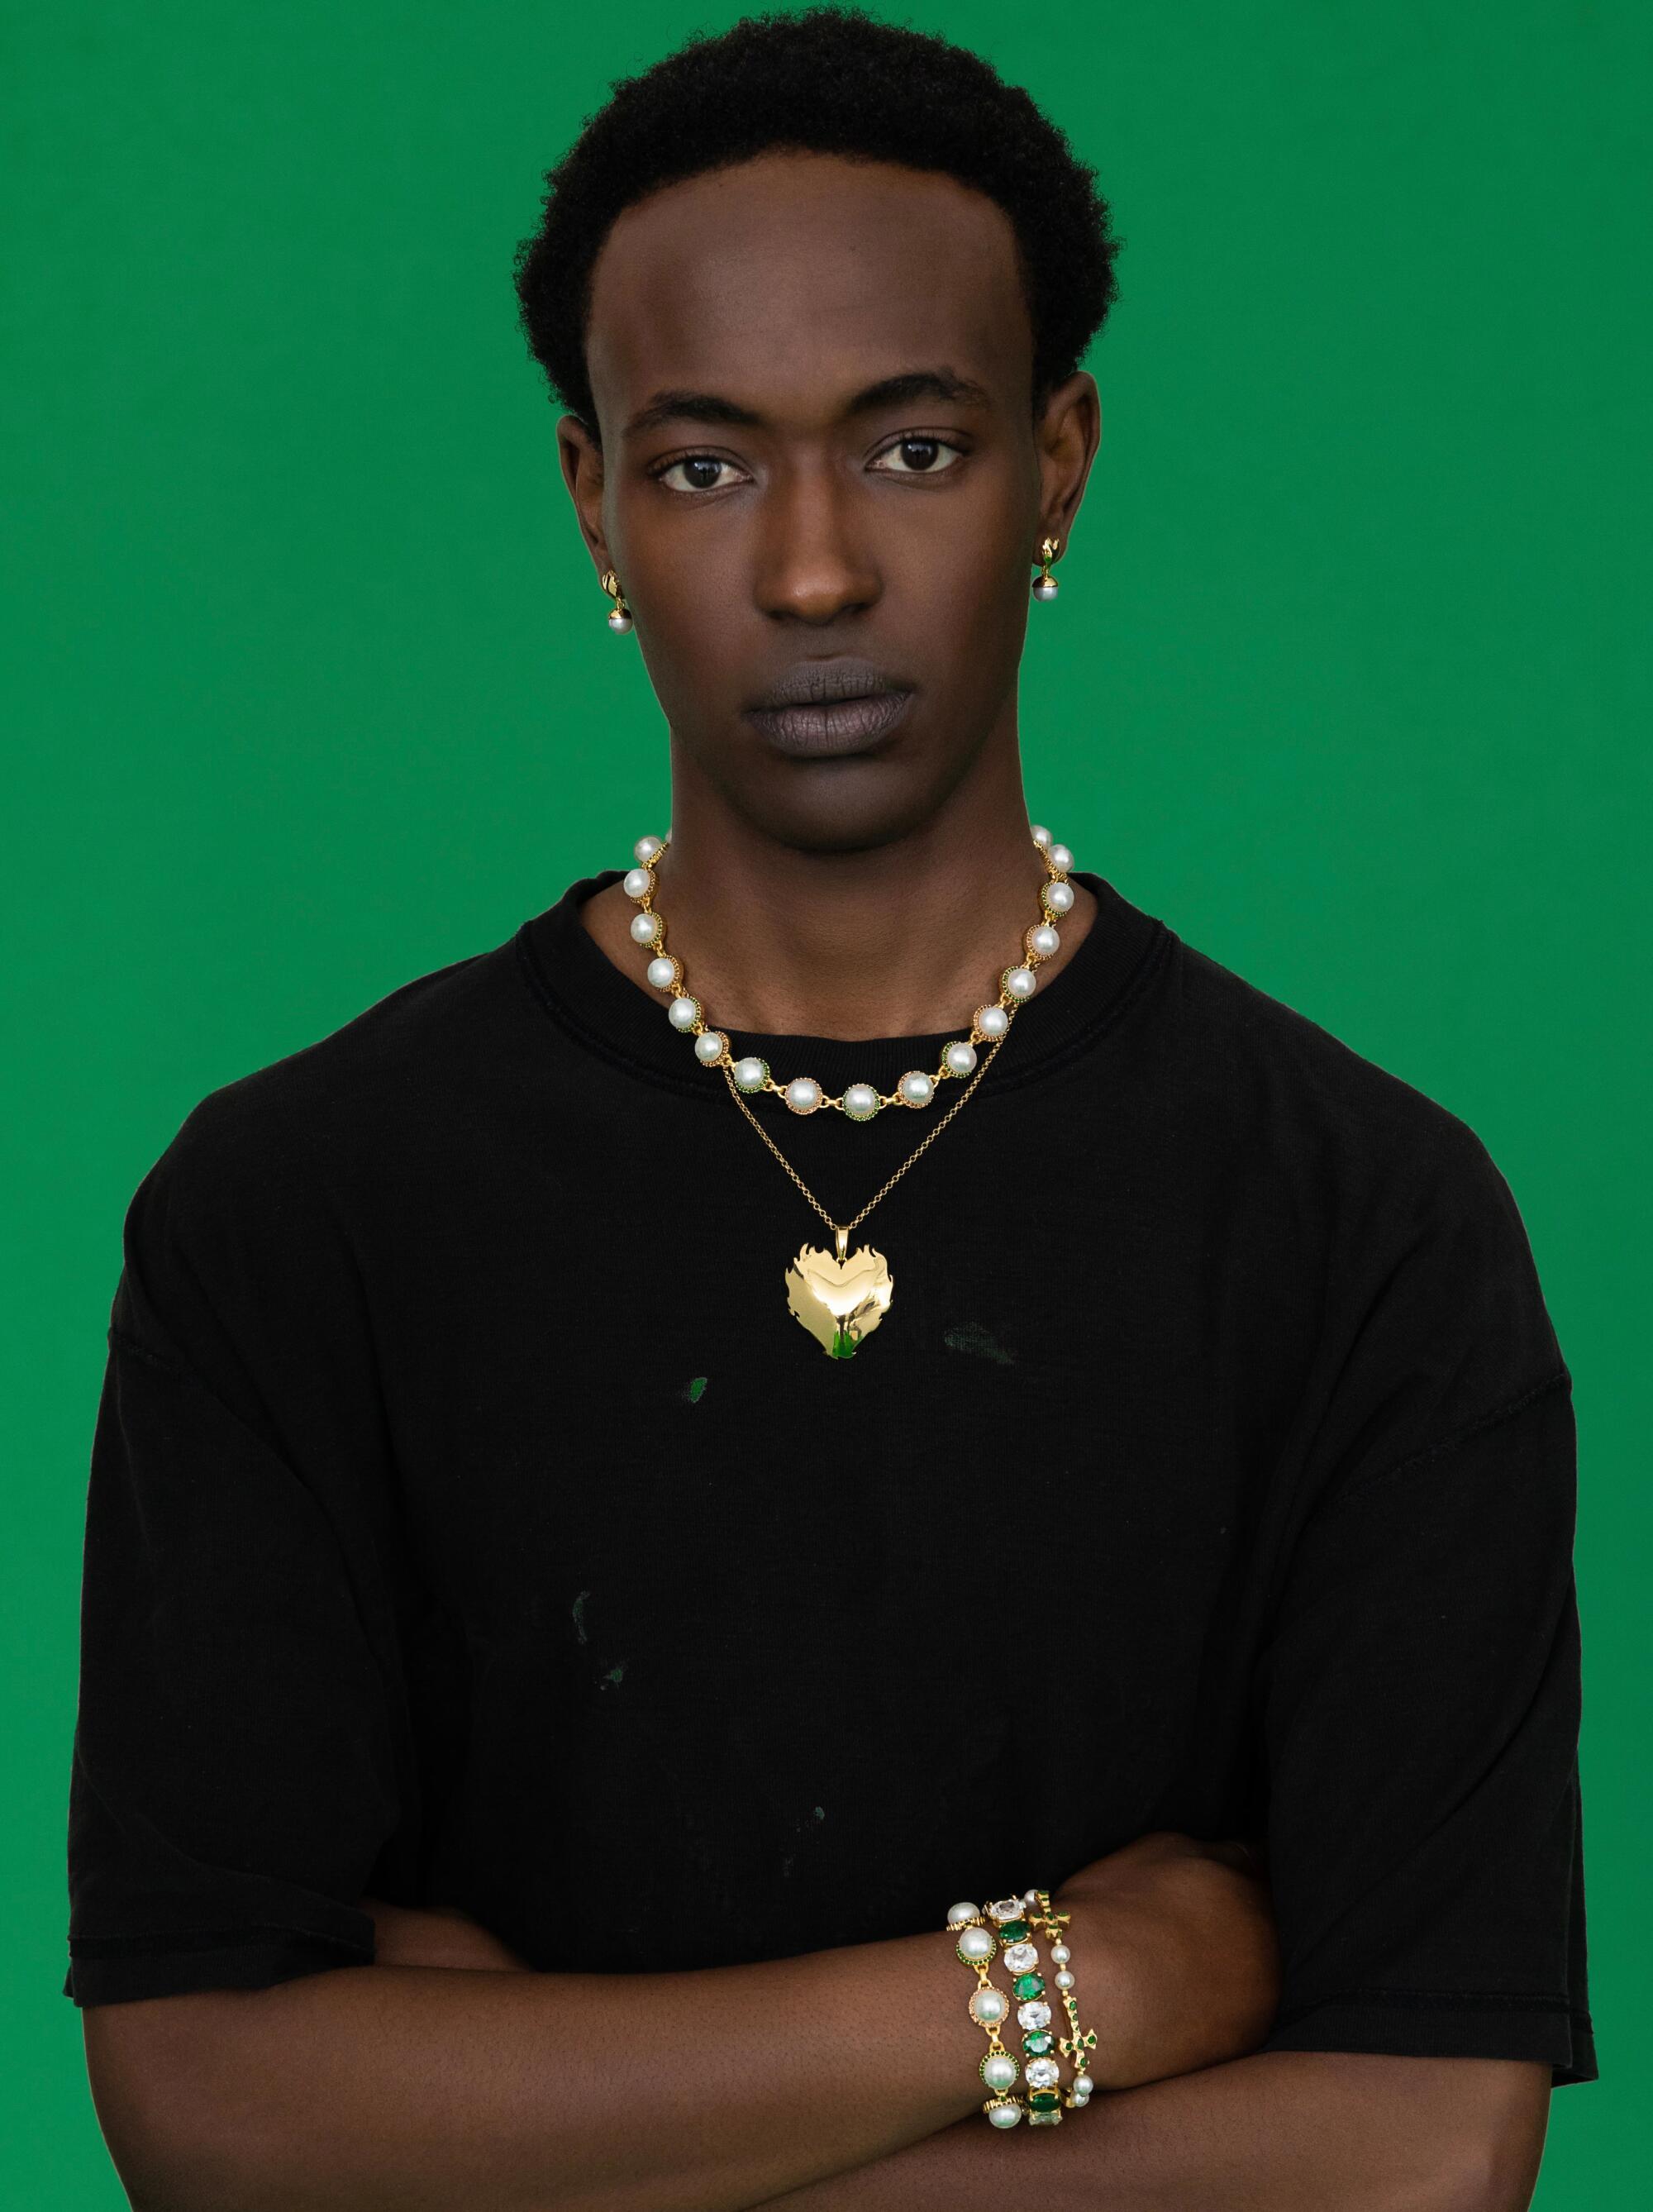 VEERT Royal Necklace in Yellow Gold, $1,295 Green and gold just go together. VEERT incorporates its namesake power color